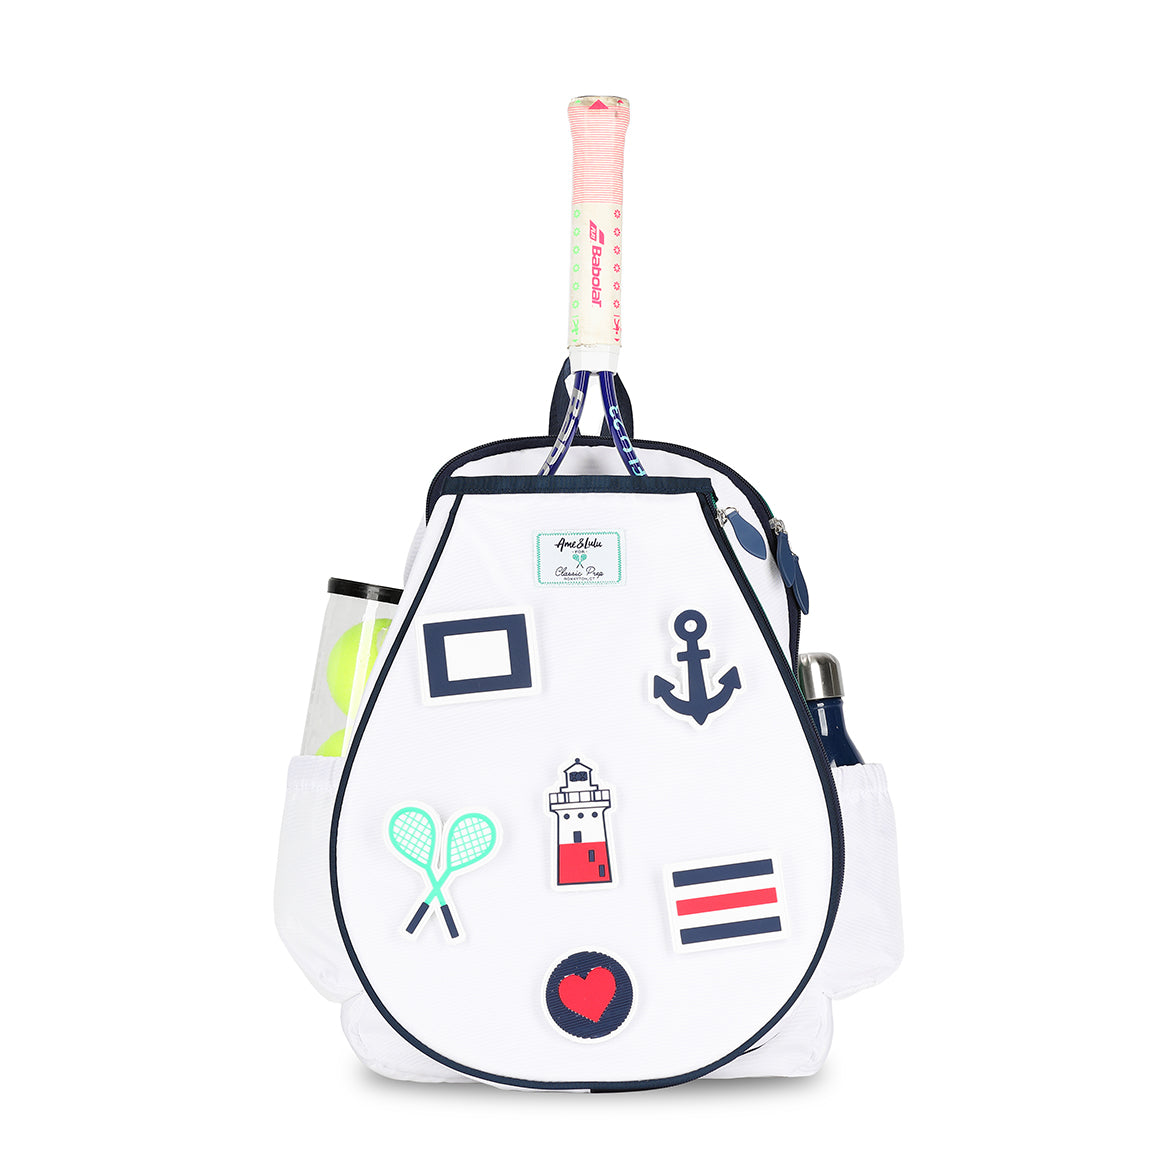 Front view of white kids tennis backpack with removeable patches. Patches are nautical themes with anchor, lighthouse, sailing flags, crossed racquets and heart.